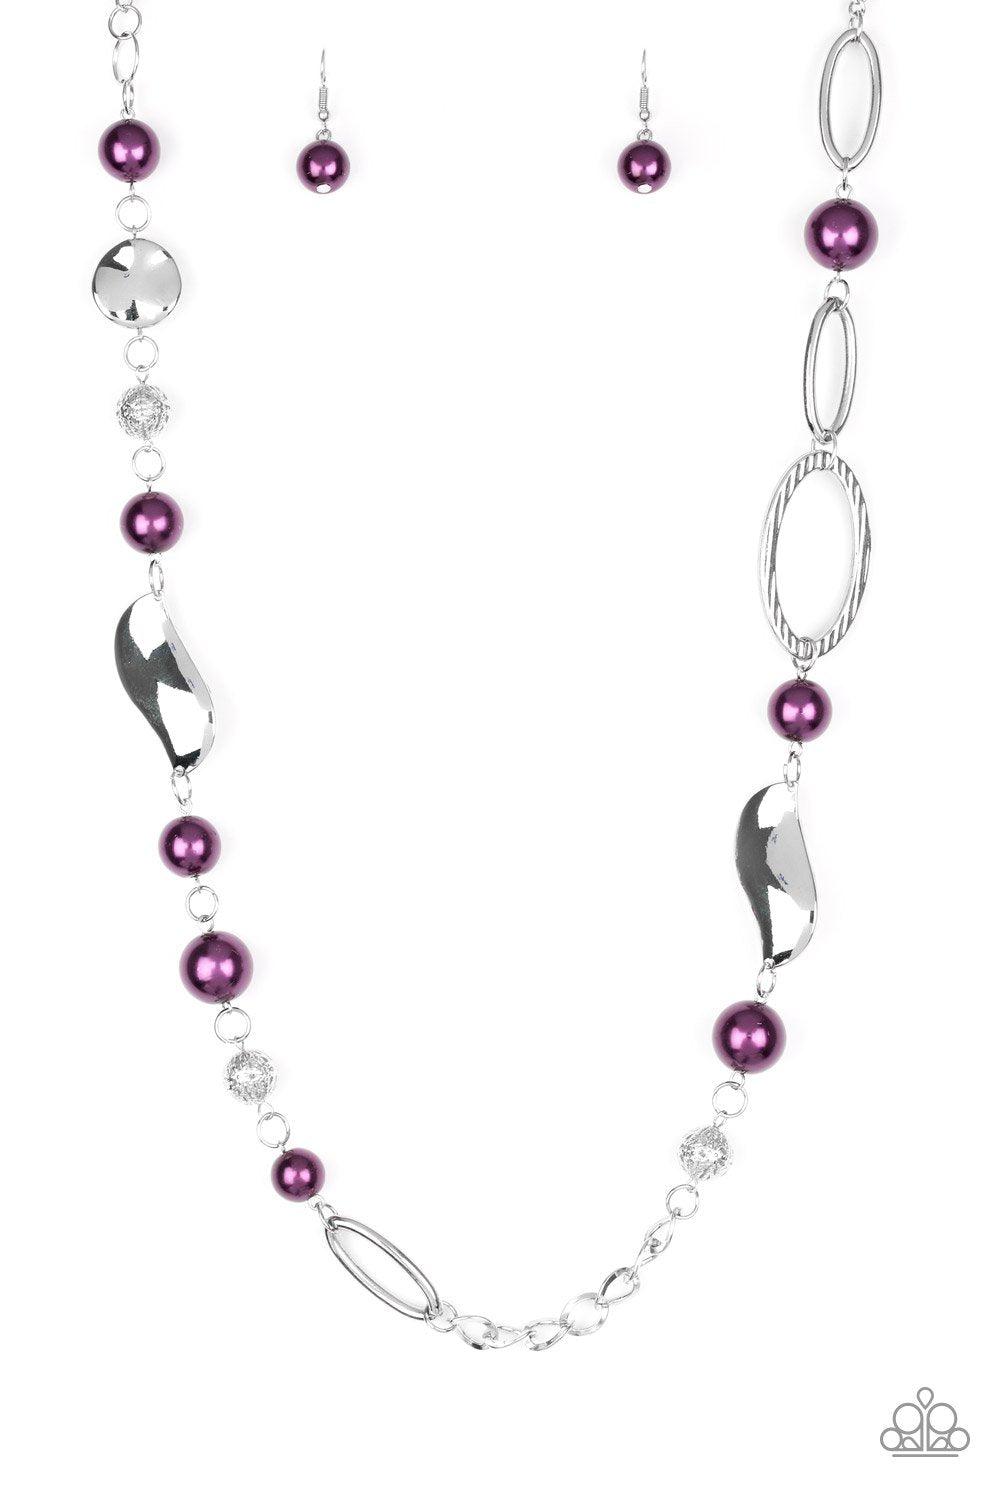 All About Me Purple and Silver Necklace - Paparazzi Accessories - lightbox -CarasShop.com - $5 Jewelry by Cara Jewels